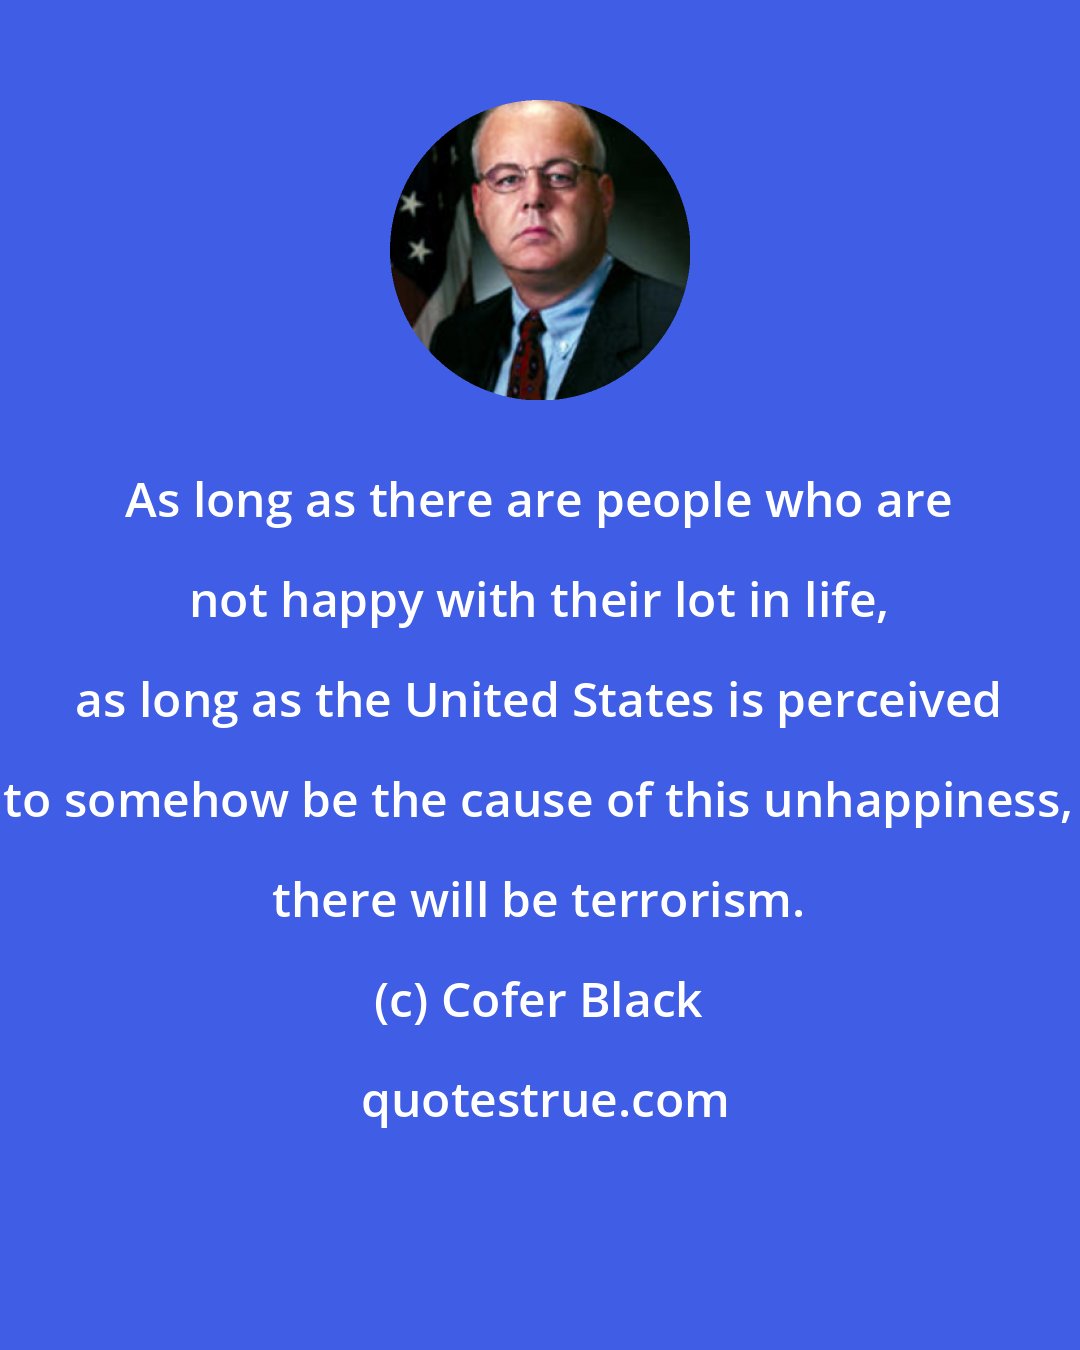 Cofer Black: As long as there are people who are not happy with their lot in life, as long as the United States is perceived to somehow be the cause of this unhappiness, there will be terrorism.